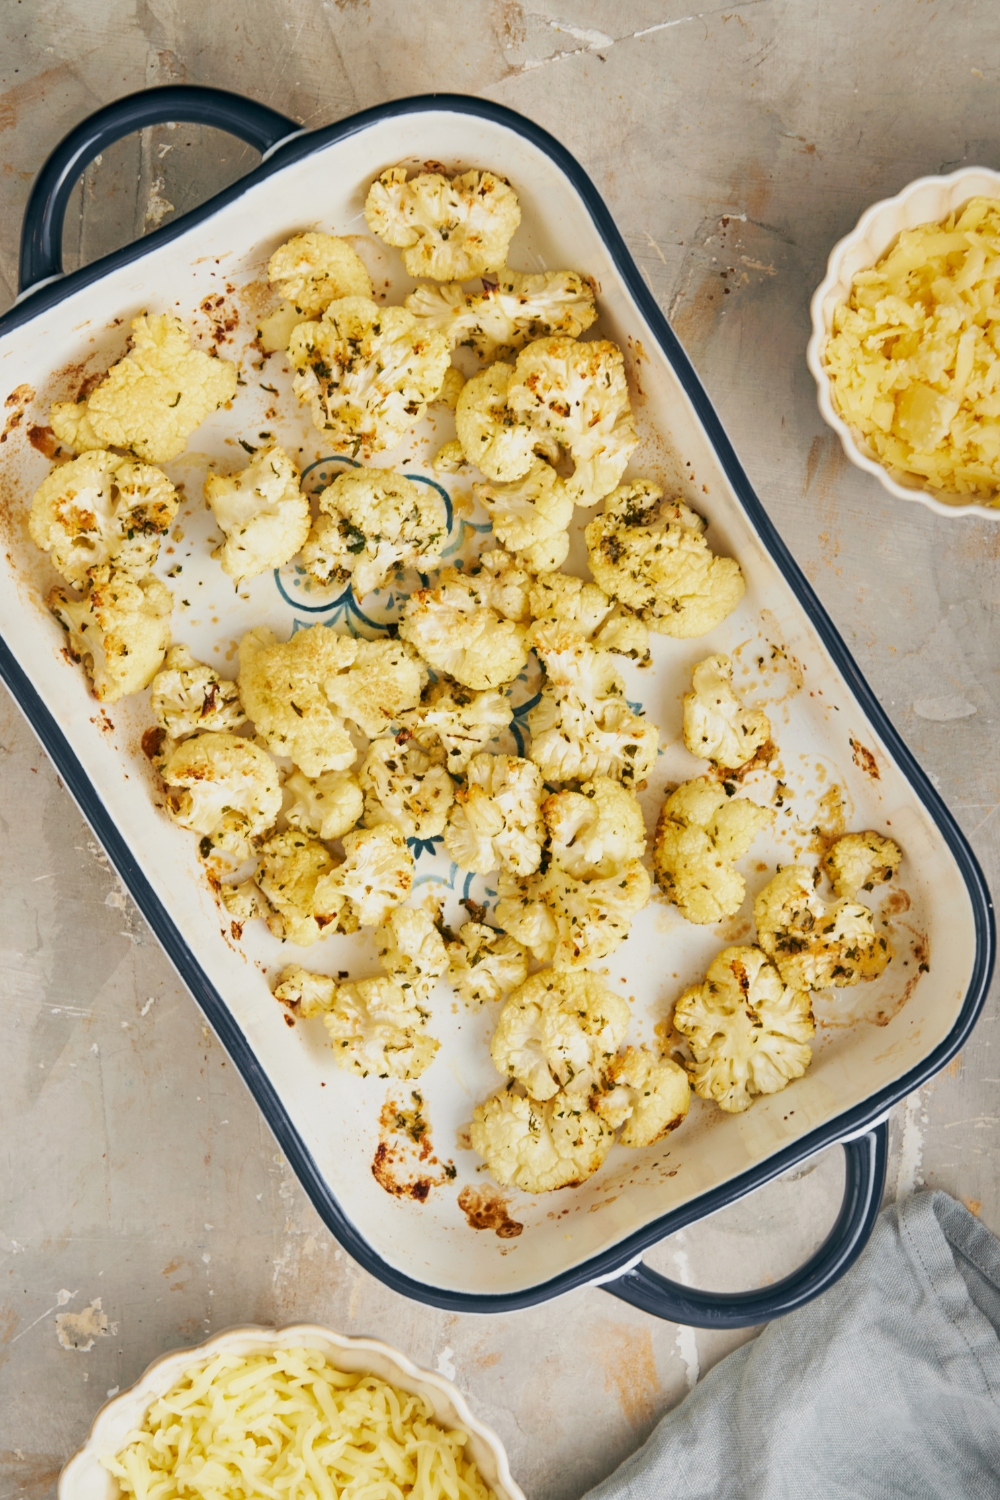 A casserole dish with a layer of cauliflower.